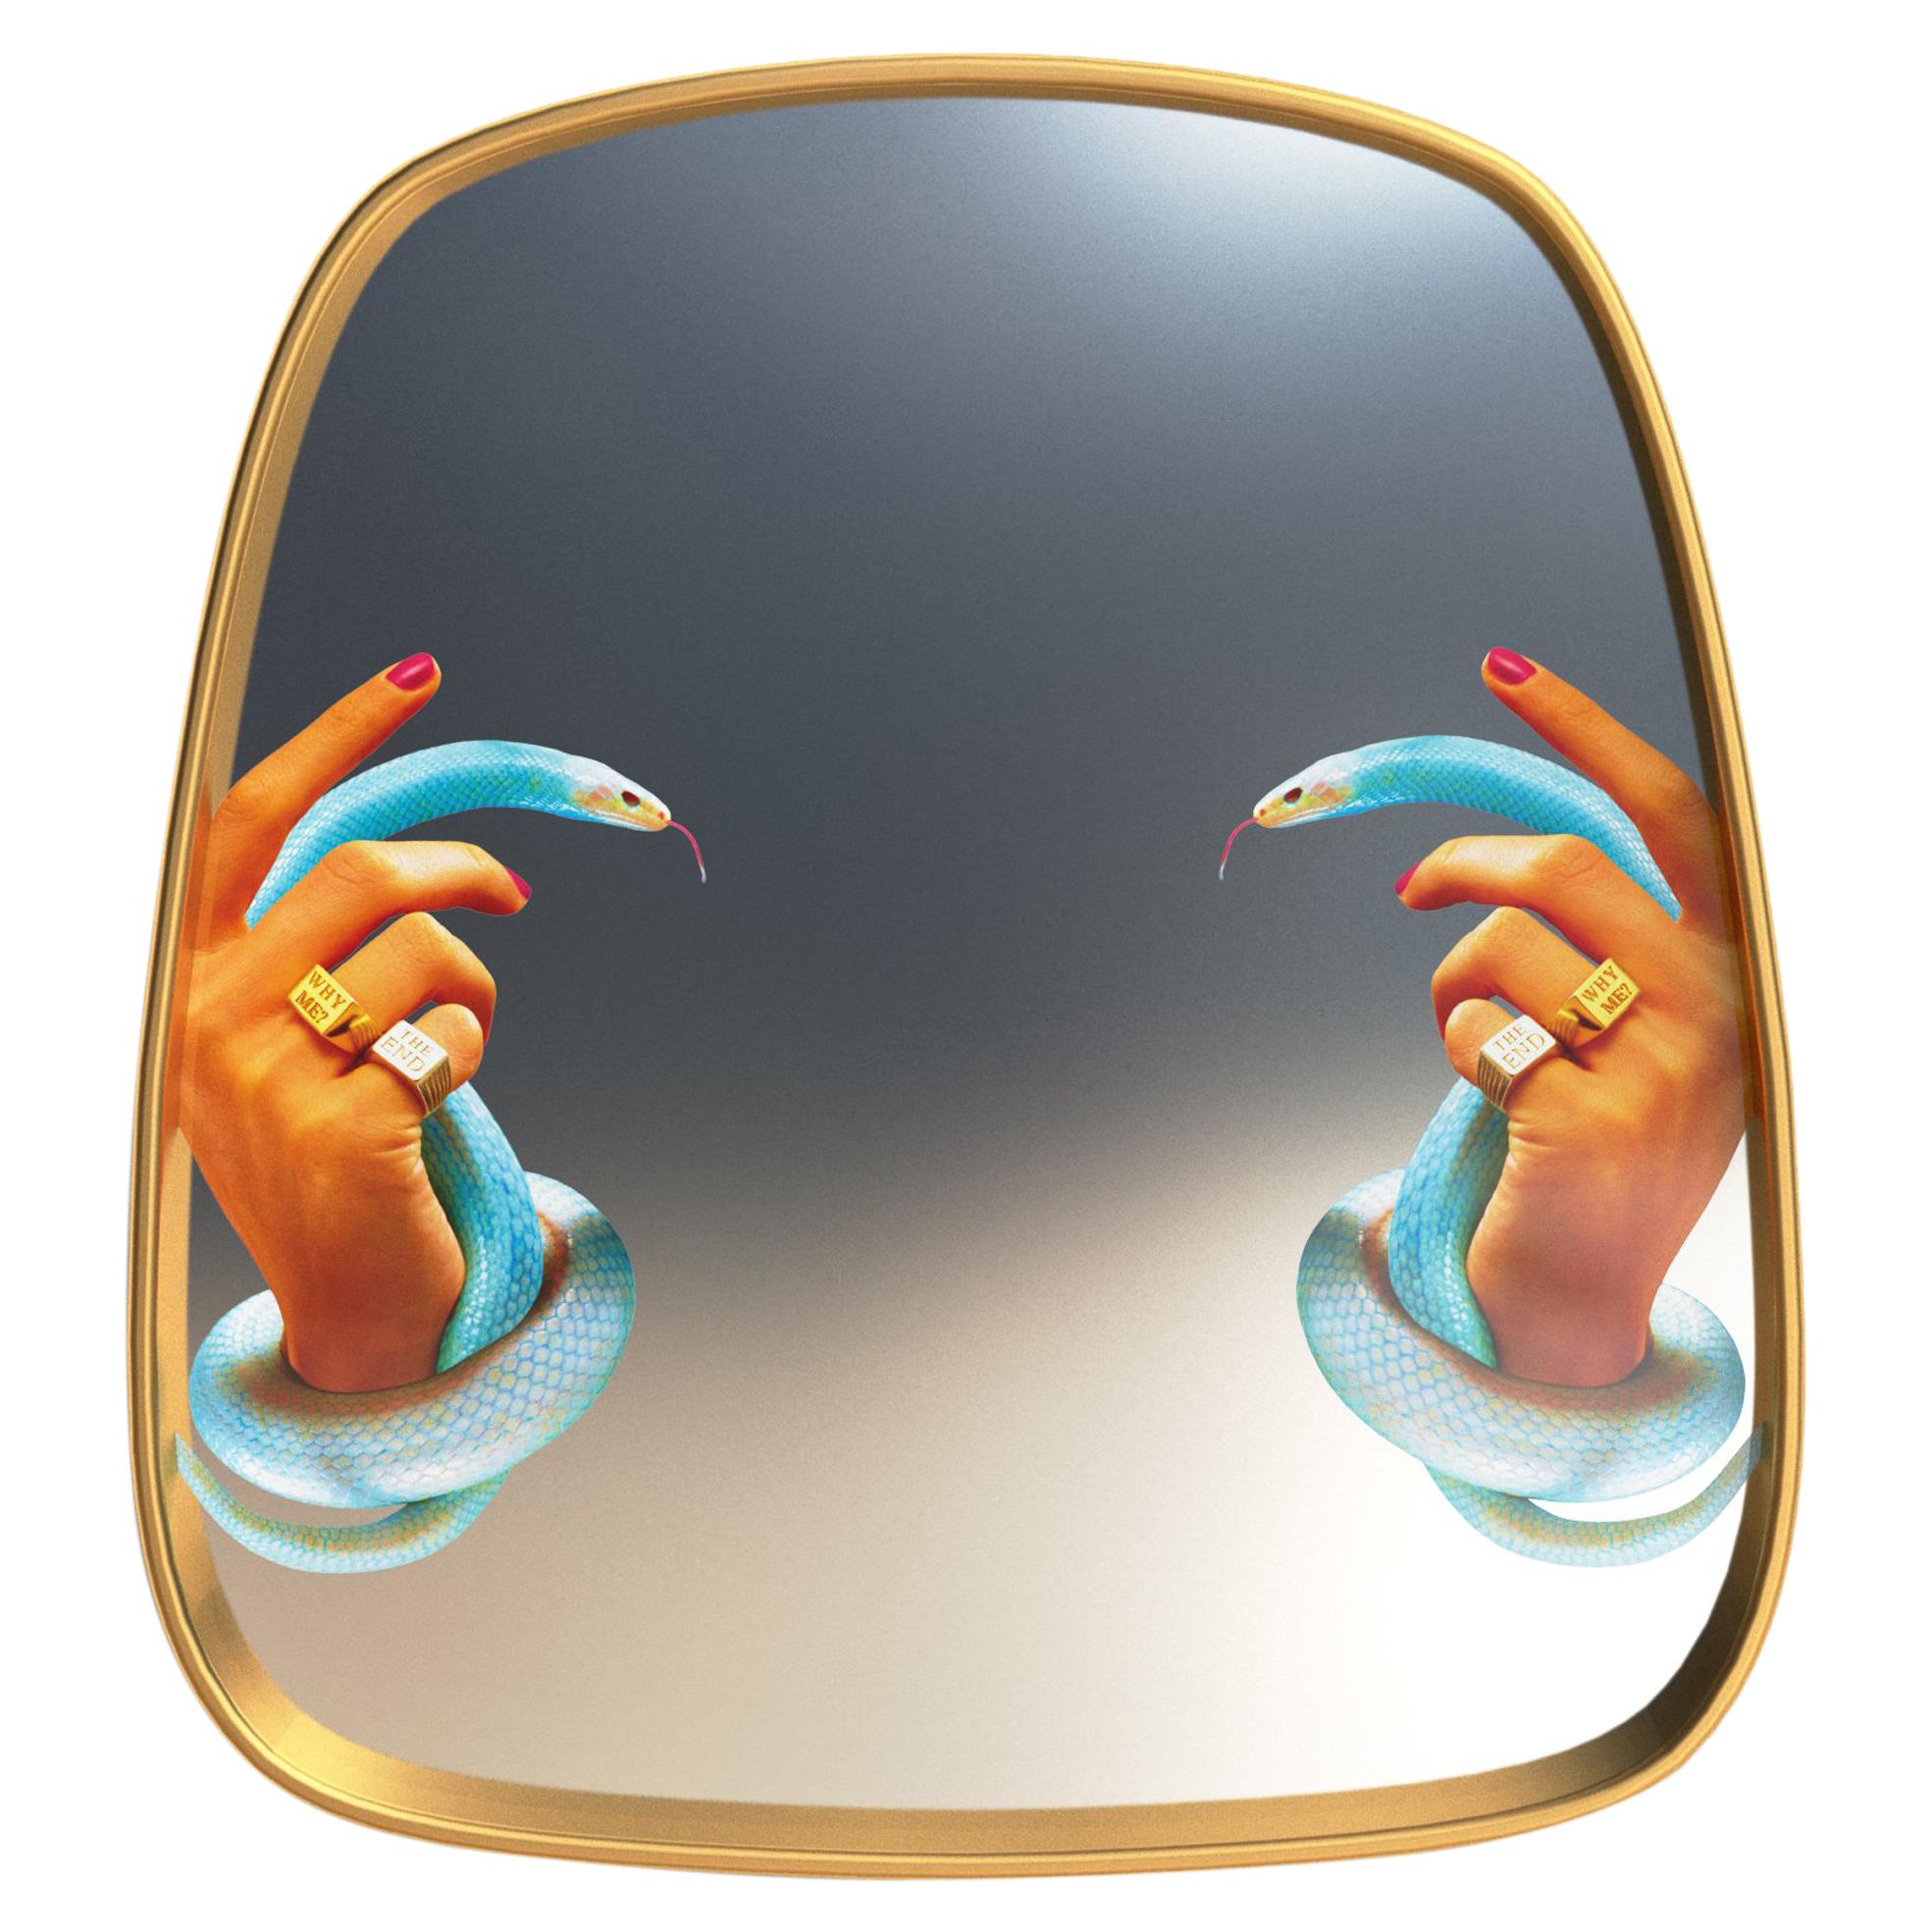 Seletti "Hand & Snakes" Wall Mirror with Gold Frame by Toiletpaper